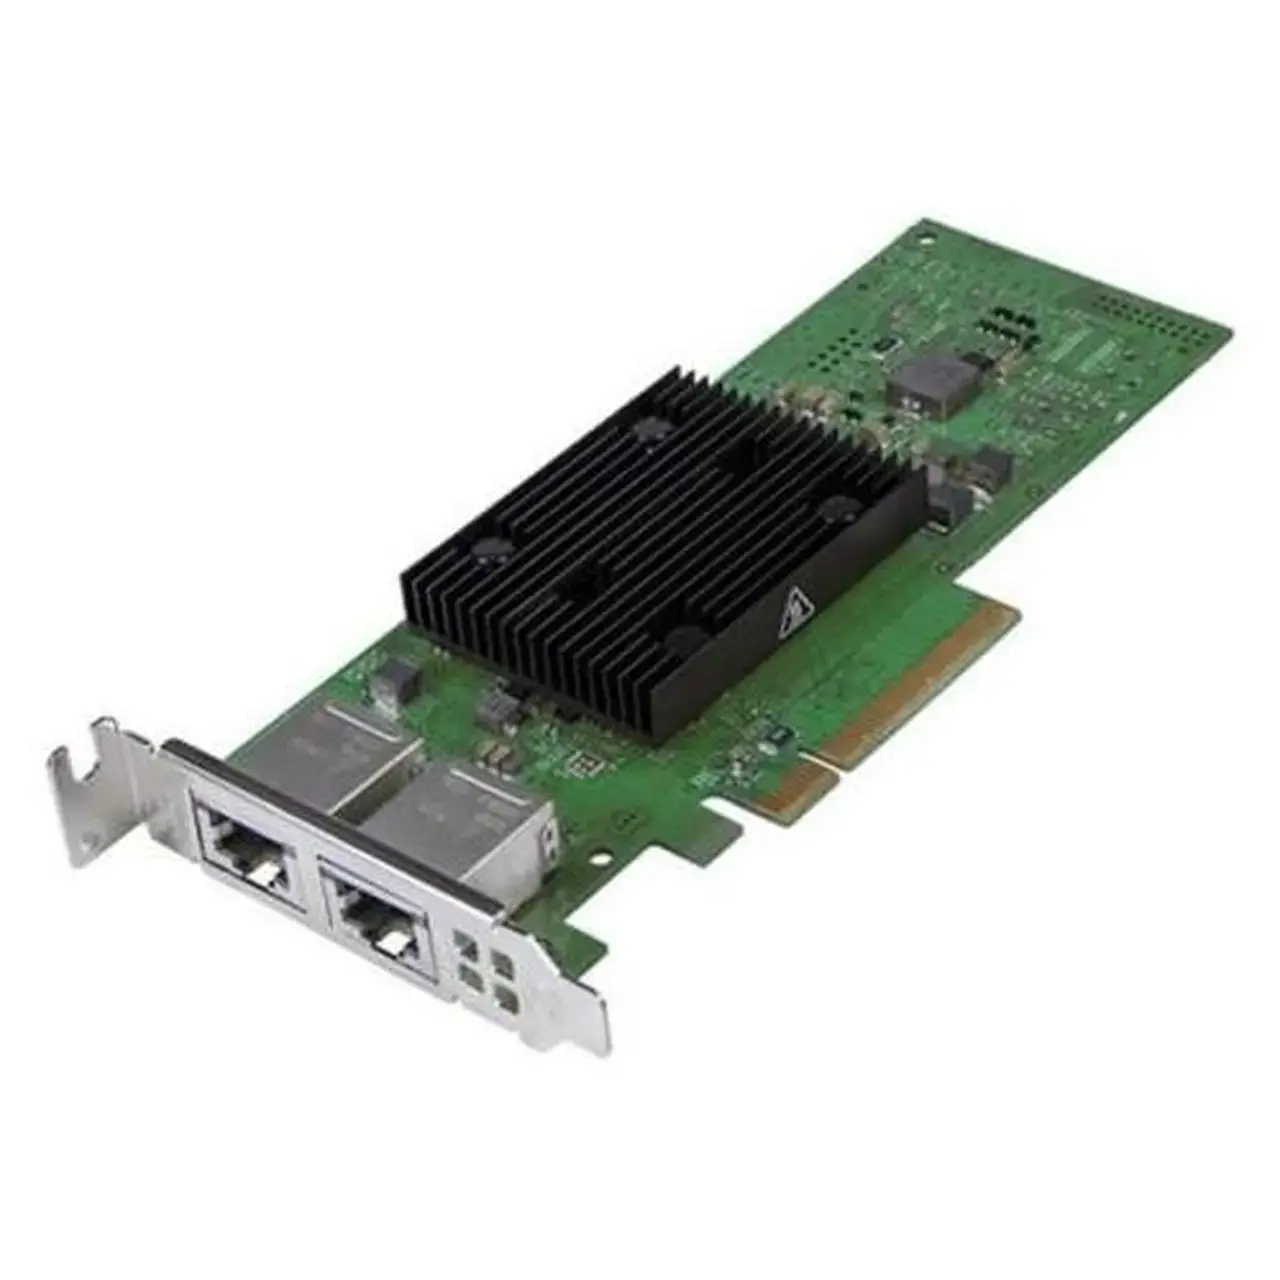 BCM957406A4060 Dell Broadcom 57406 DP 10GBase-T LP Network Interface Card